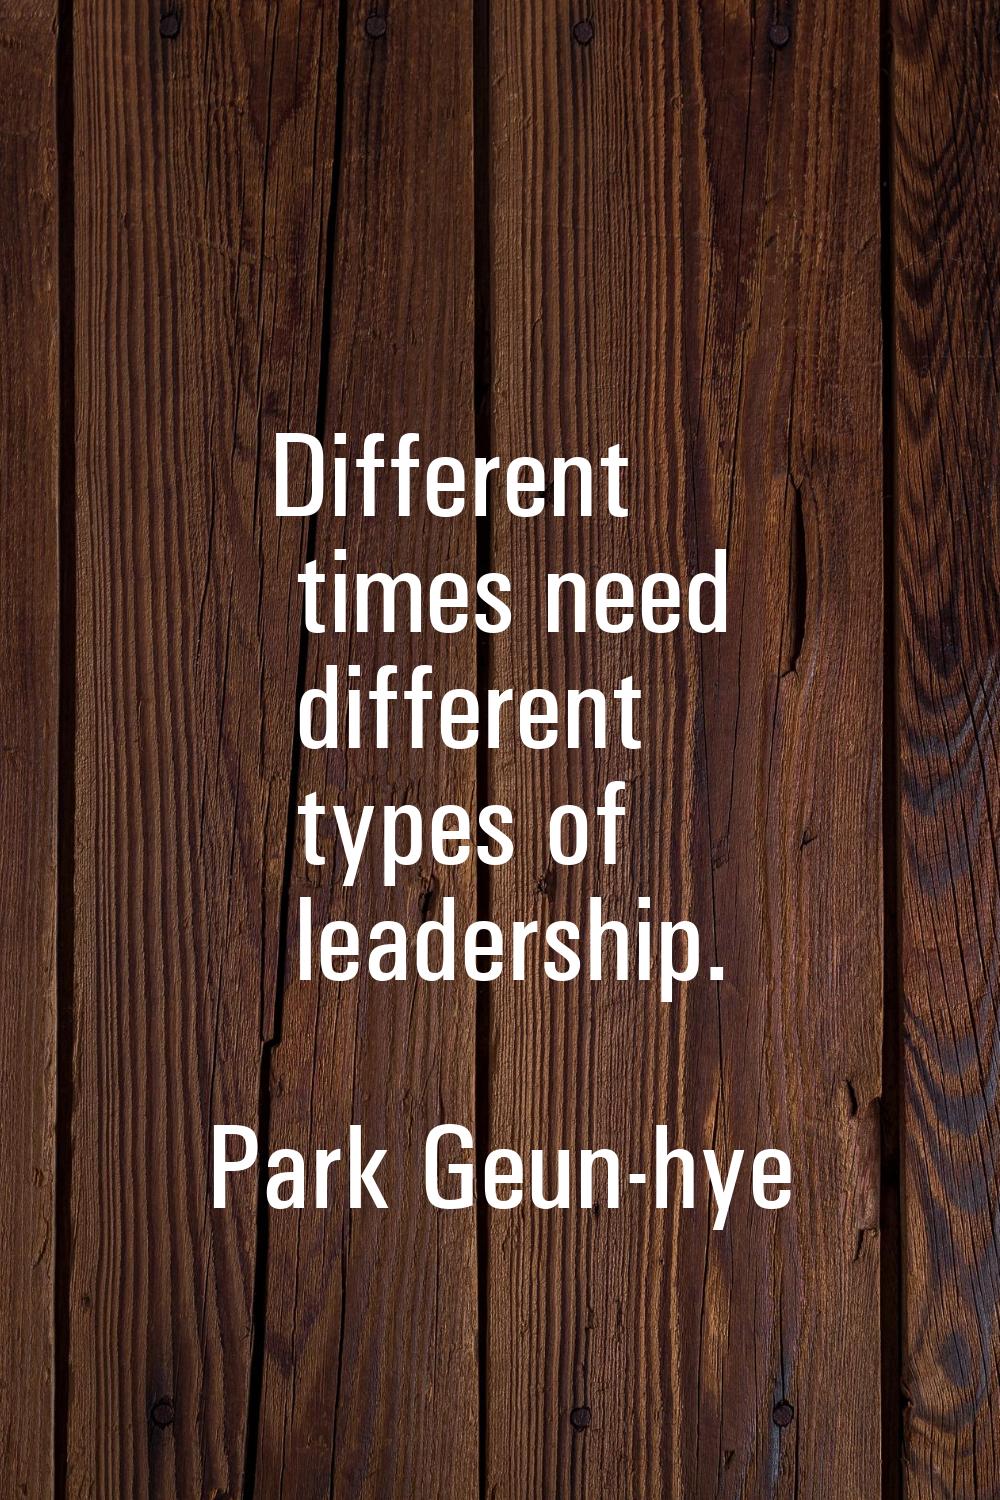 Different times need different types of leadership.